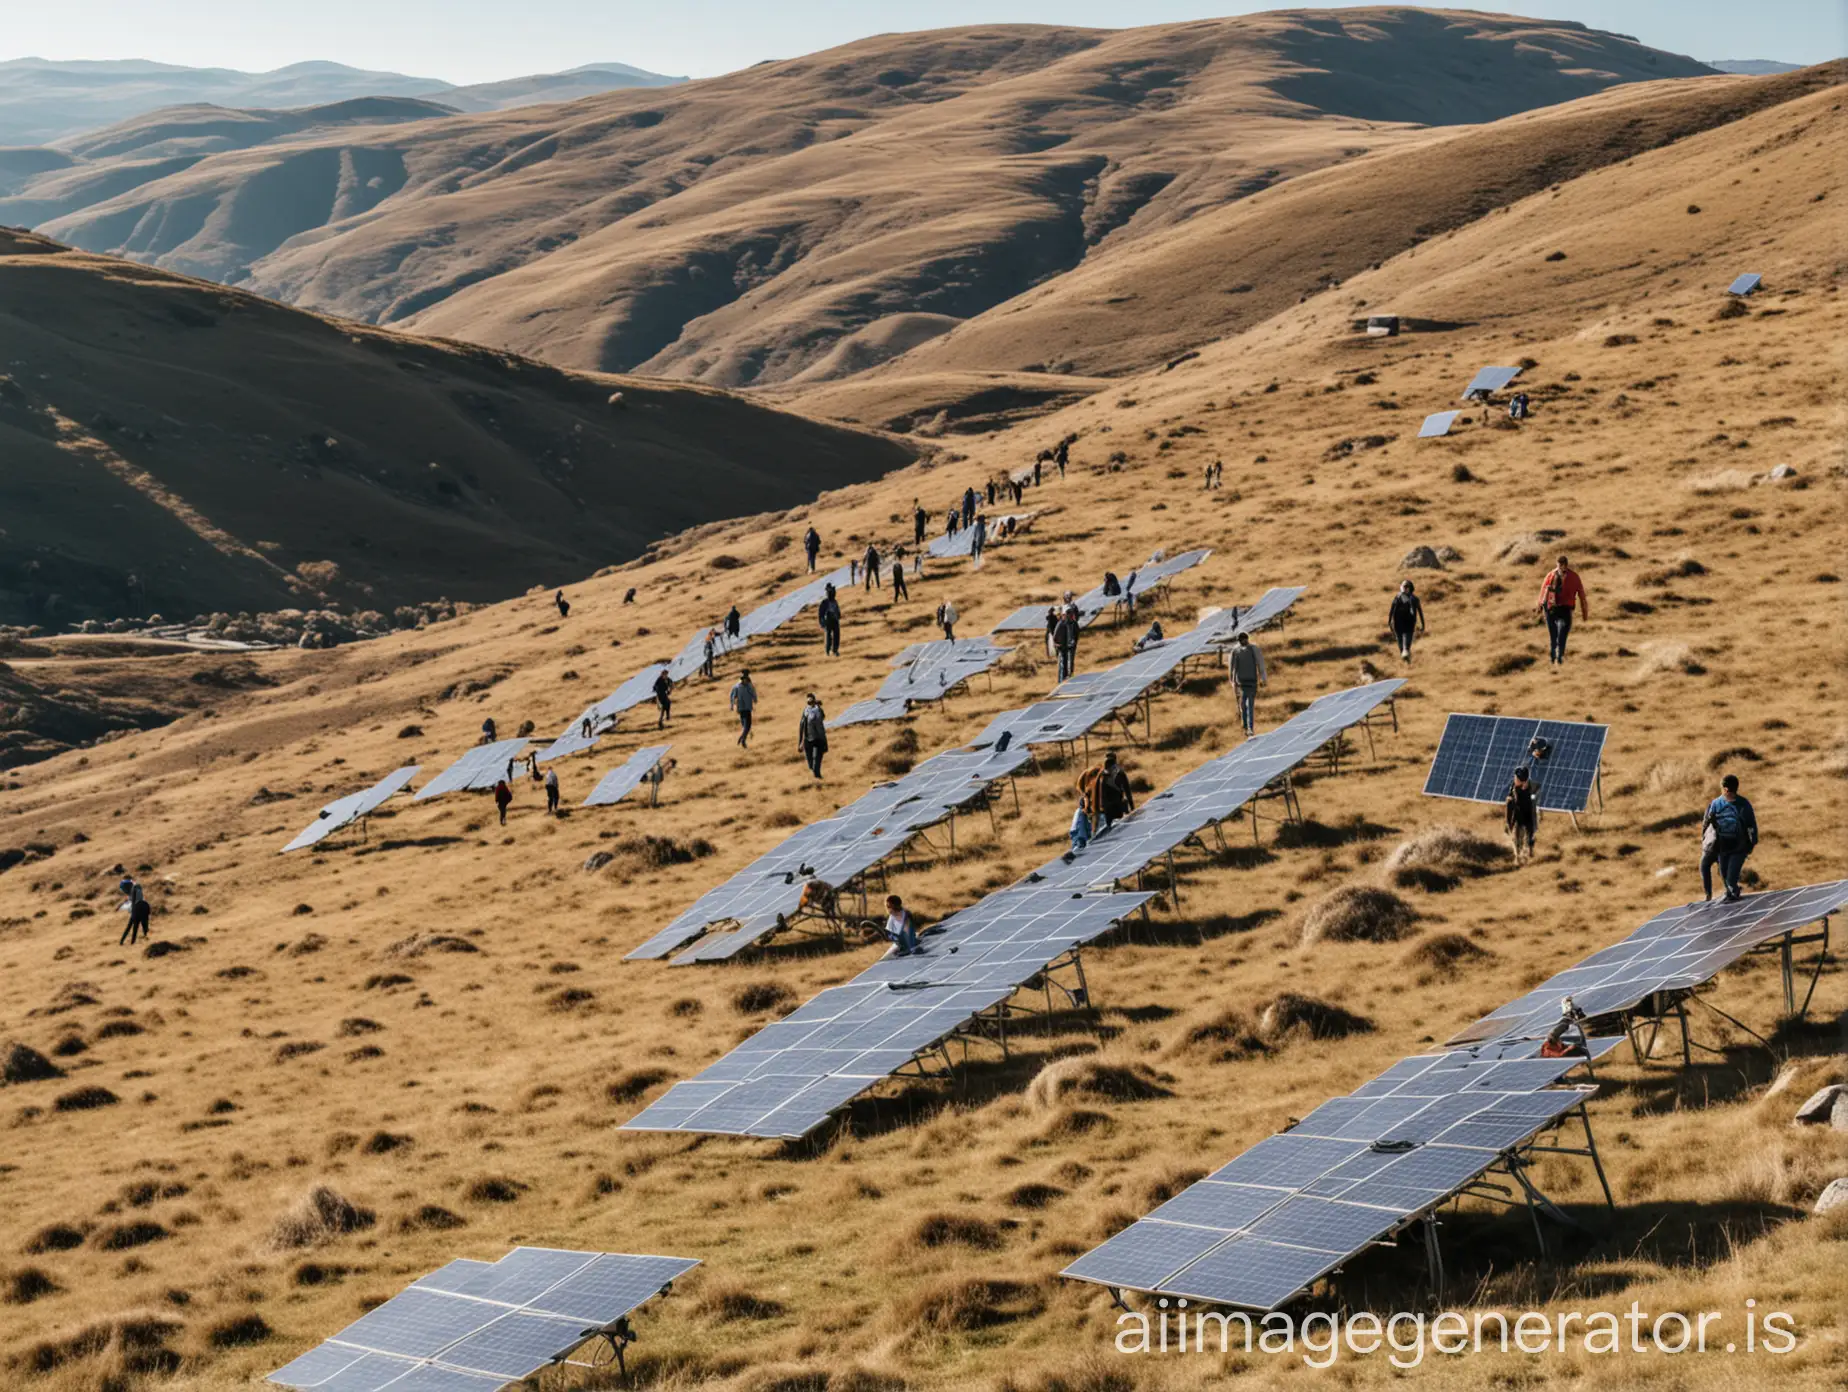 a group of people in the distance, walking around hills with a few solar panels scattered on them. the sky is very bright. realistic